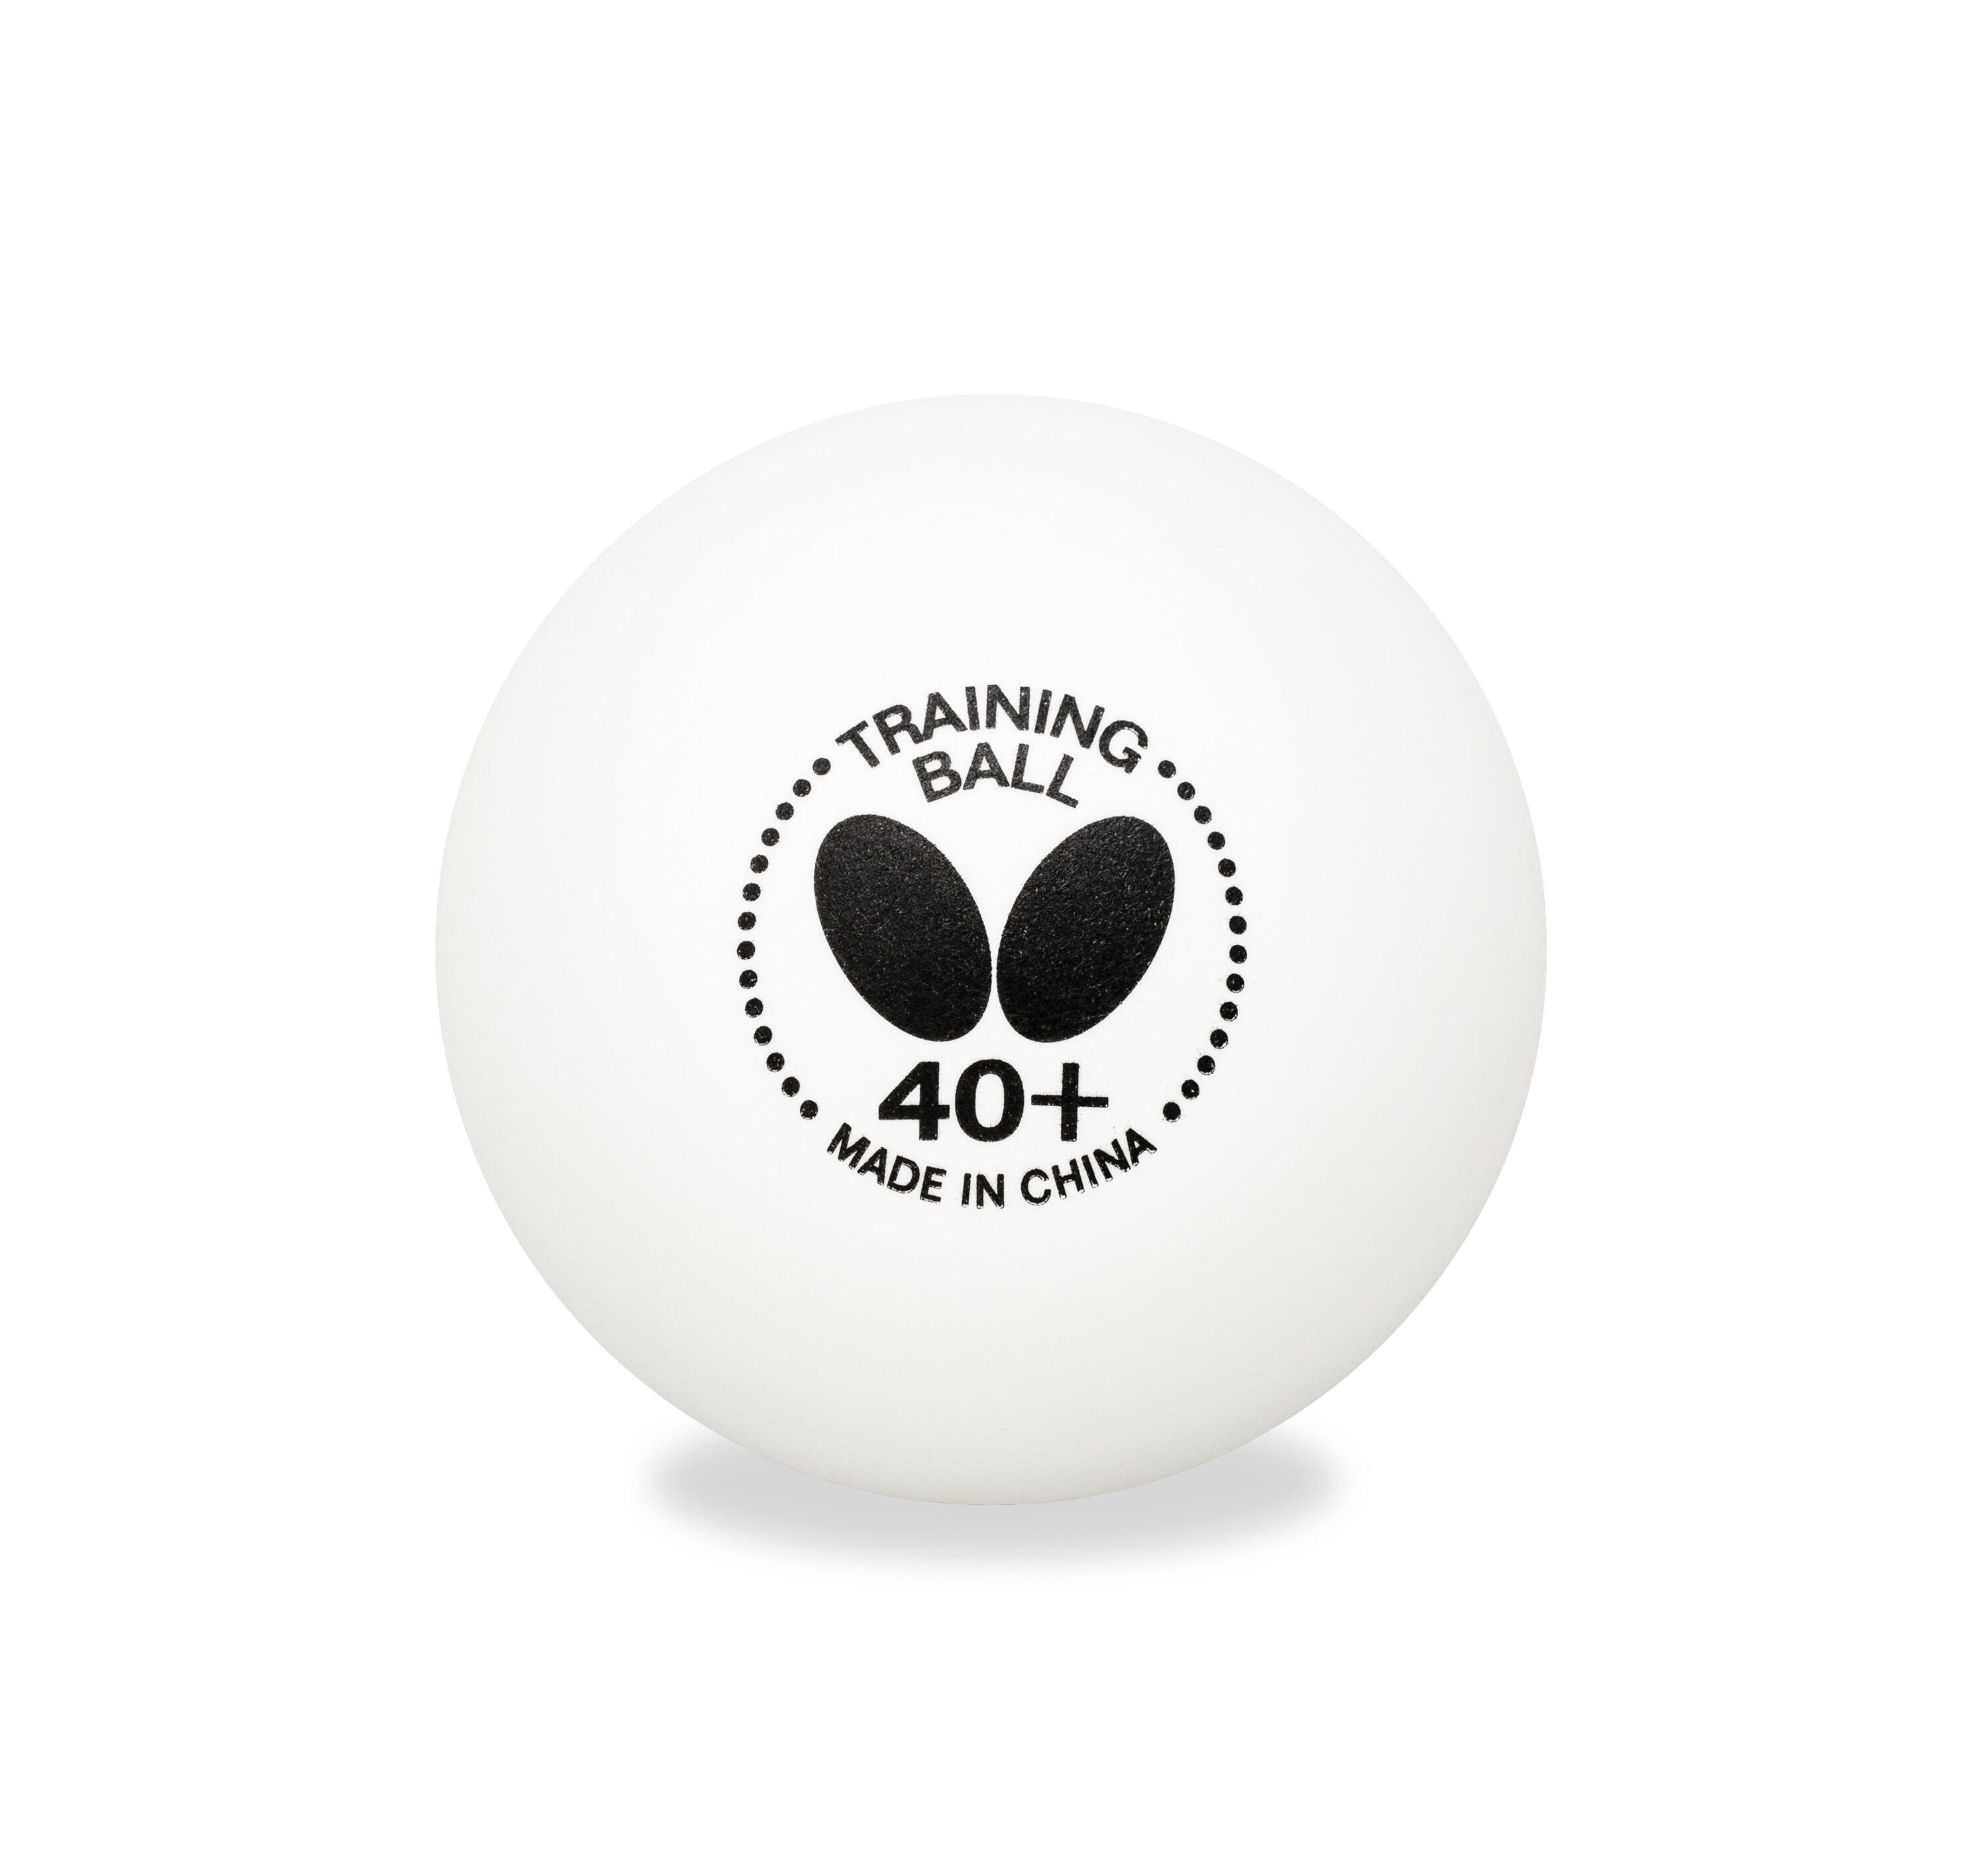 Butterfly Training Ball 40+ (Box of 120) 2/2